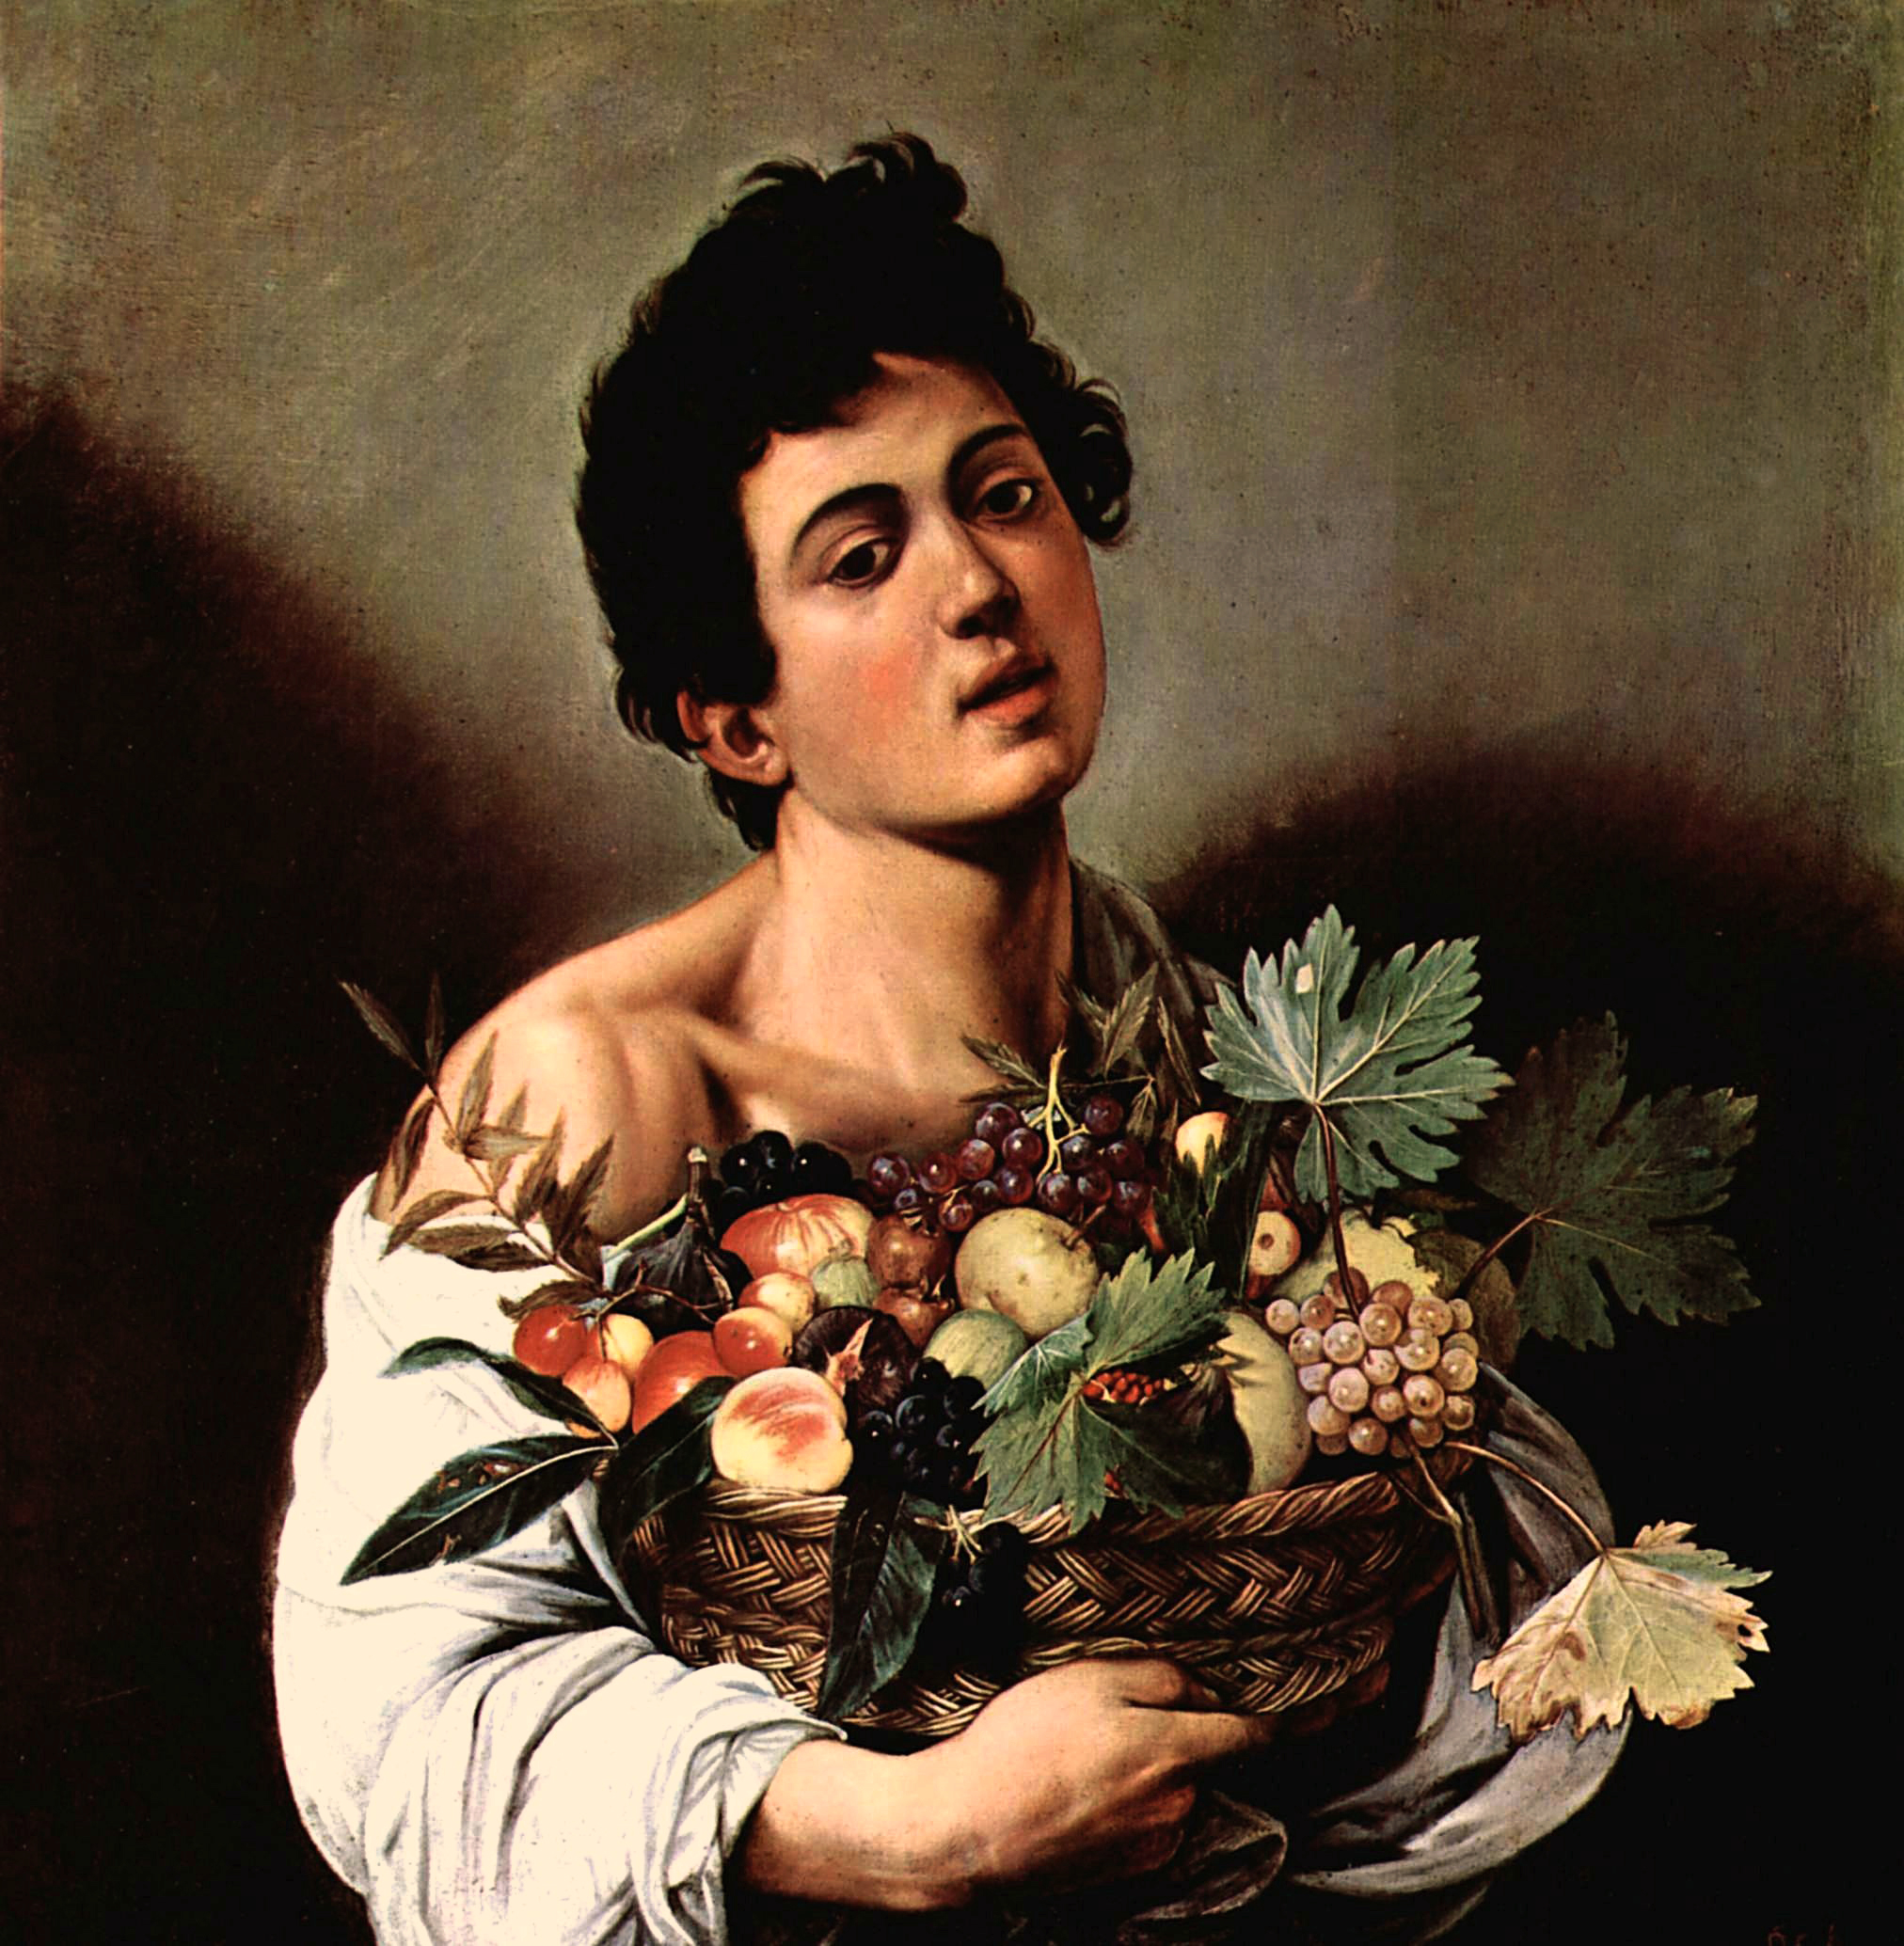 Caravaggio - Boy with a Basket of Fruit (1593)